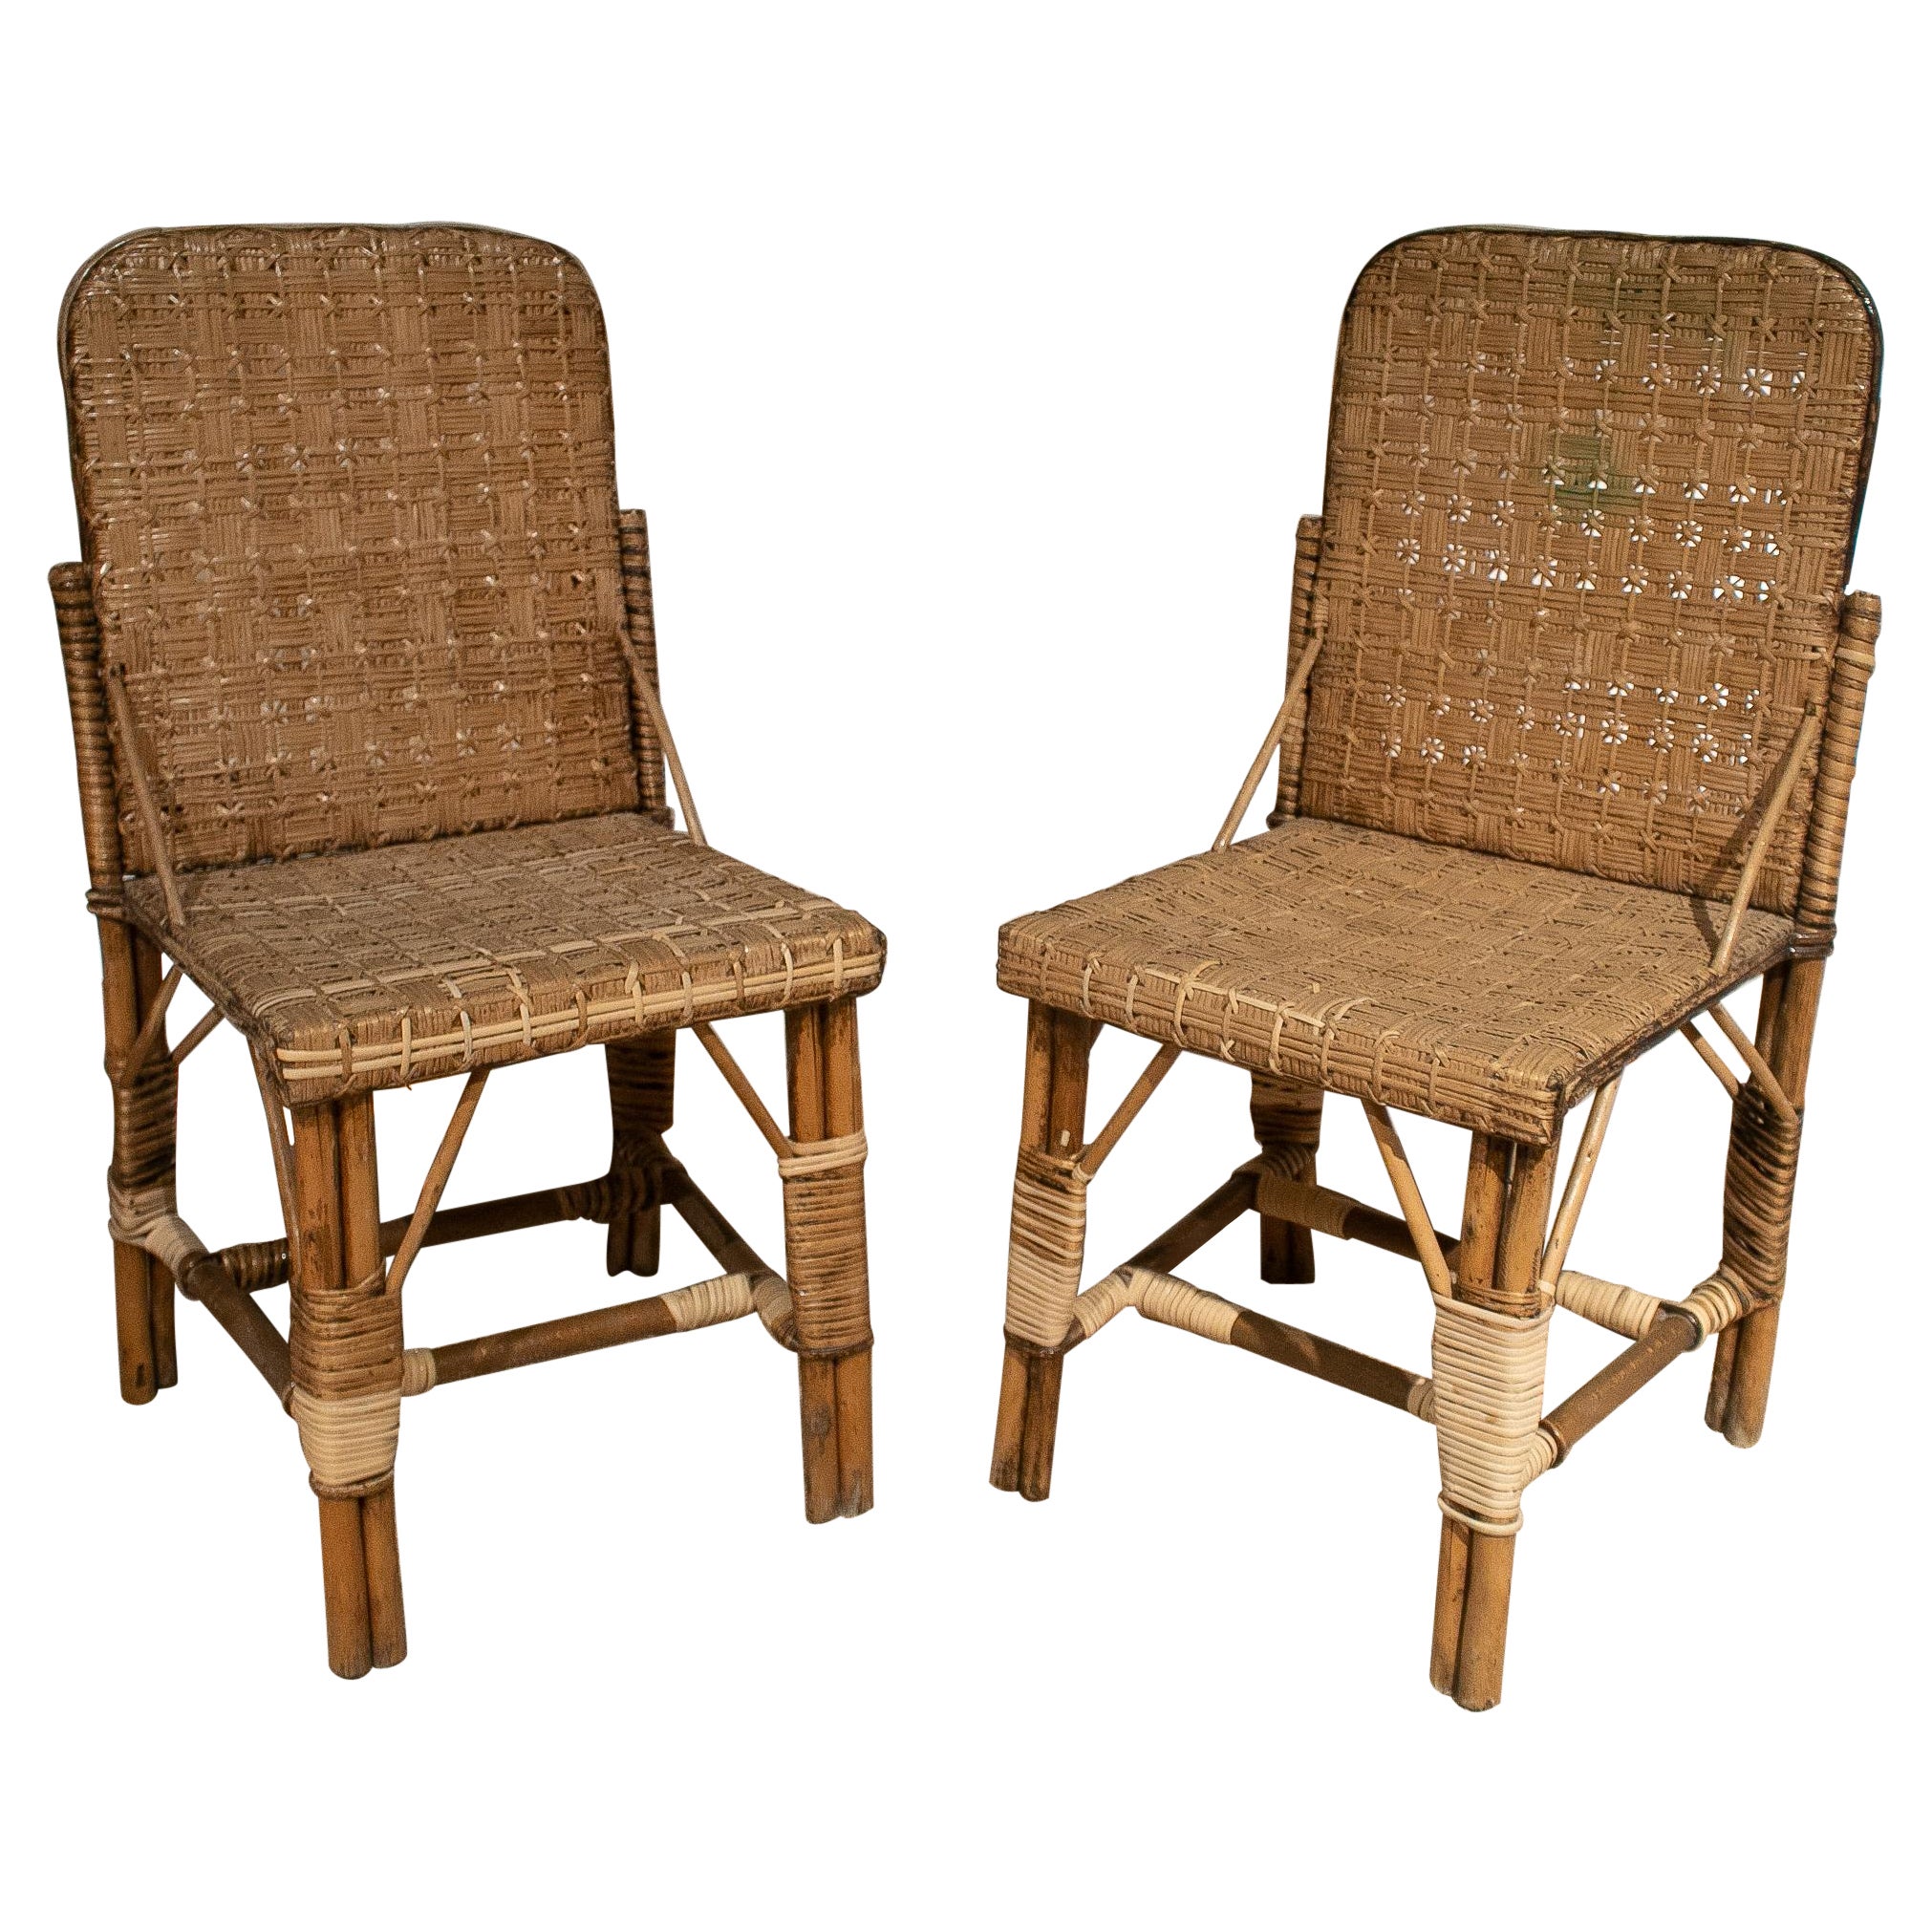 Pair of 1950s Spanish Hand Woven Wicker on Wood Chairs For Sale